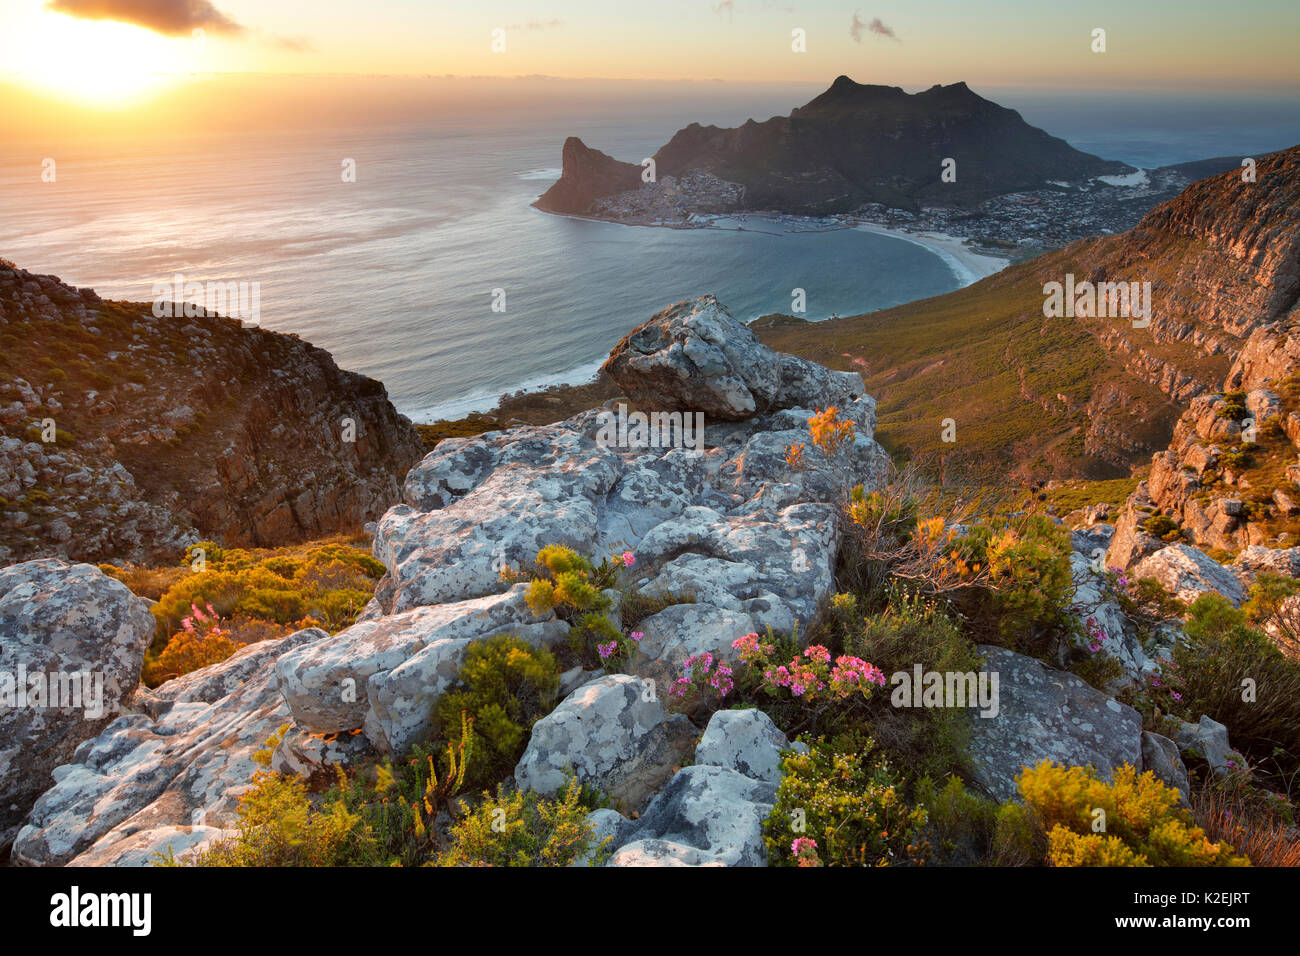 Hout Bay, from Table Mountain National Park, Western Cape, South Africa, December 2014. Stock Photo